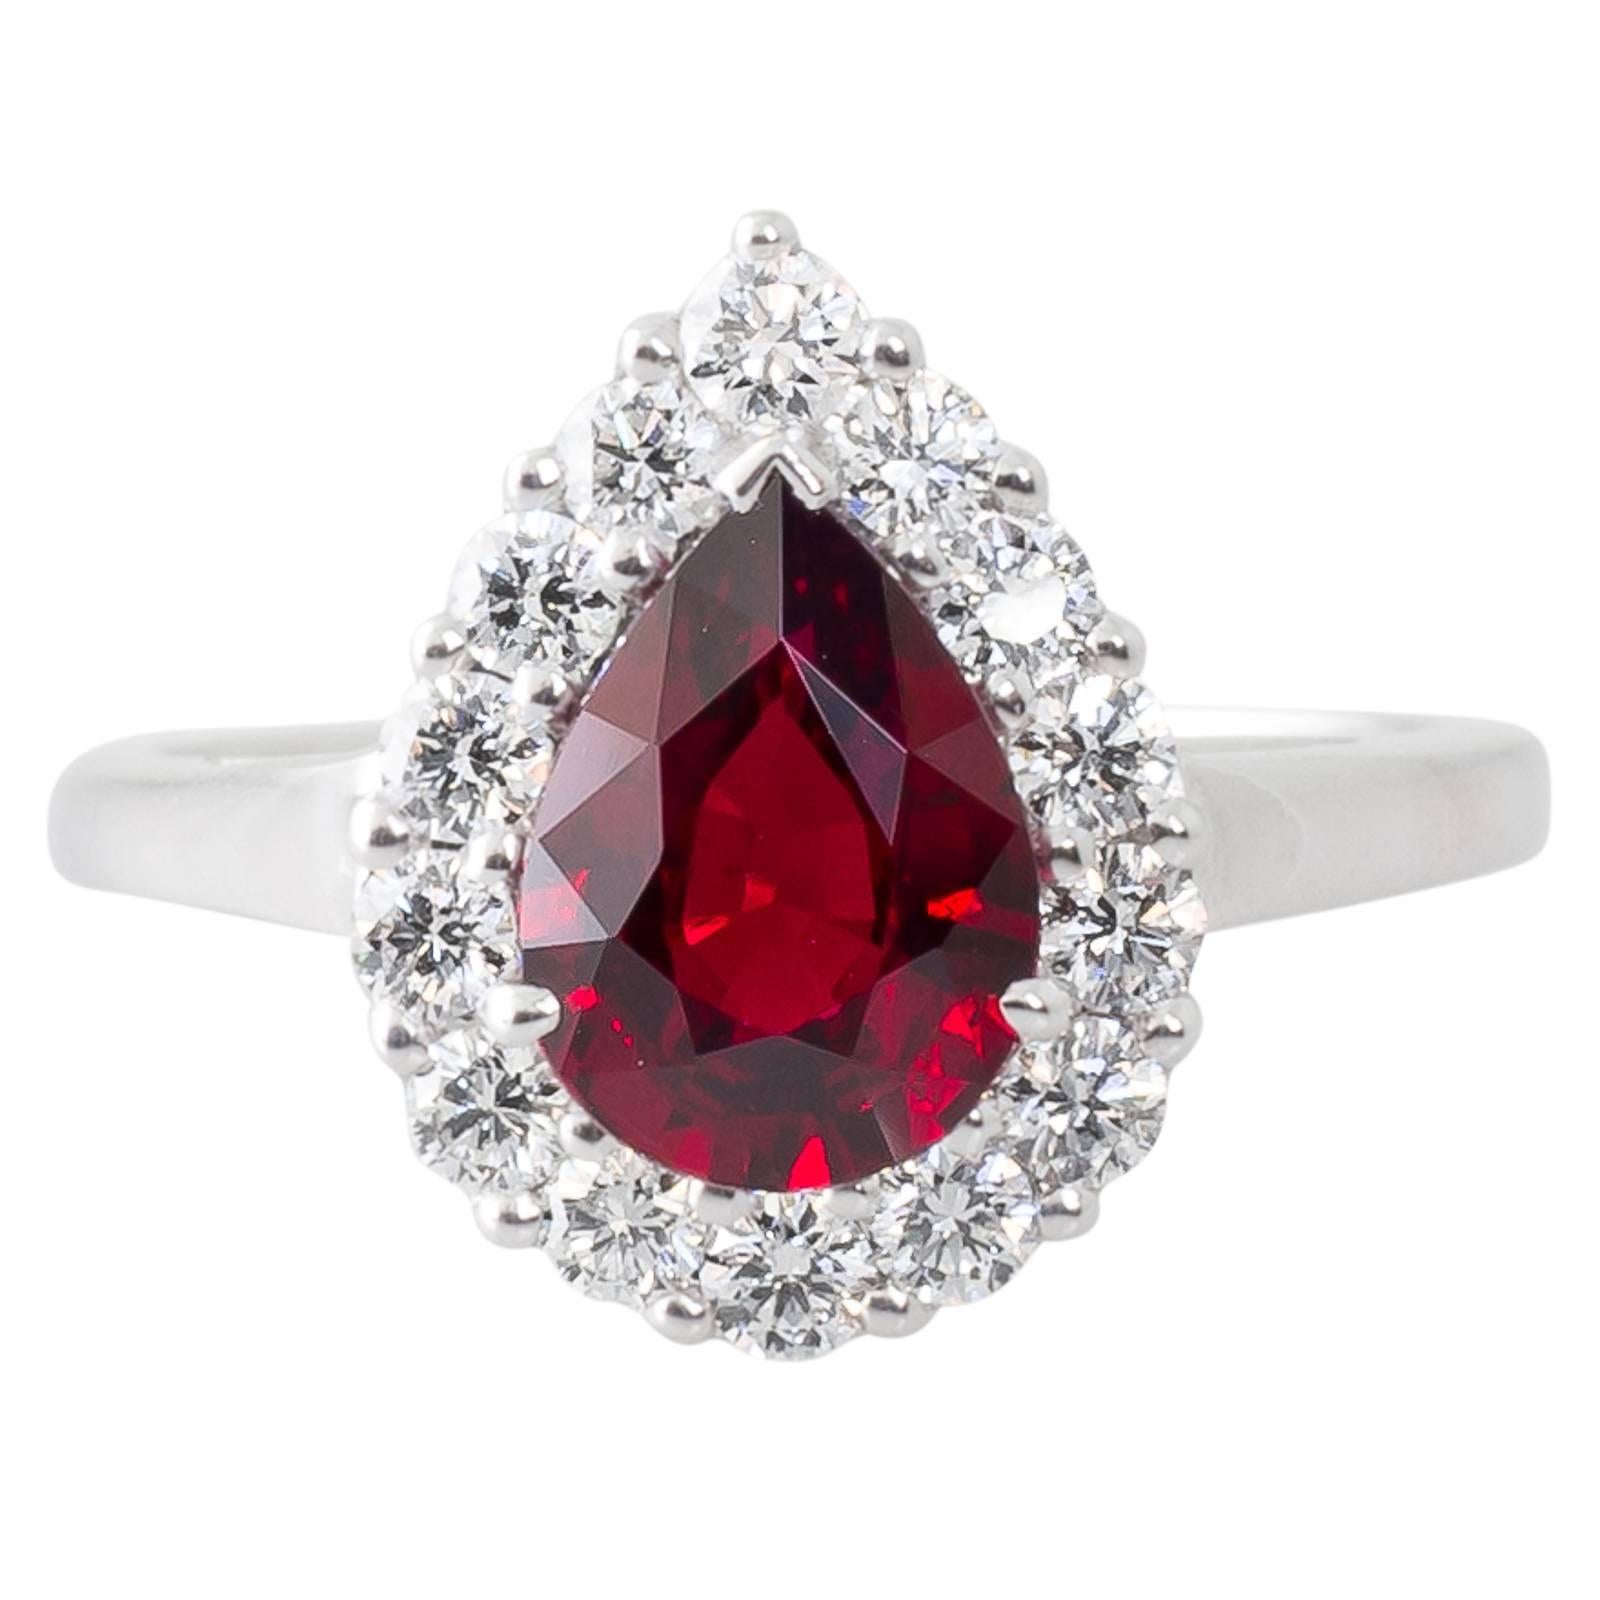 Pear Shape 1.57 Carat Mozambique Ruby and Diamond Cluster Ring